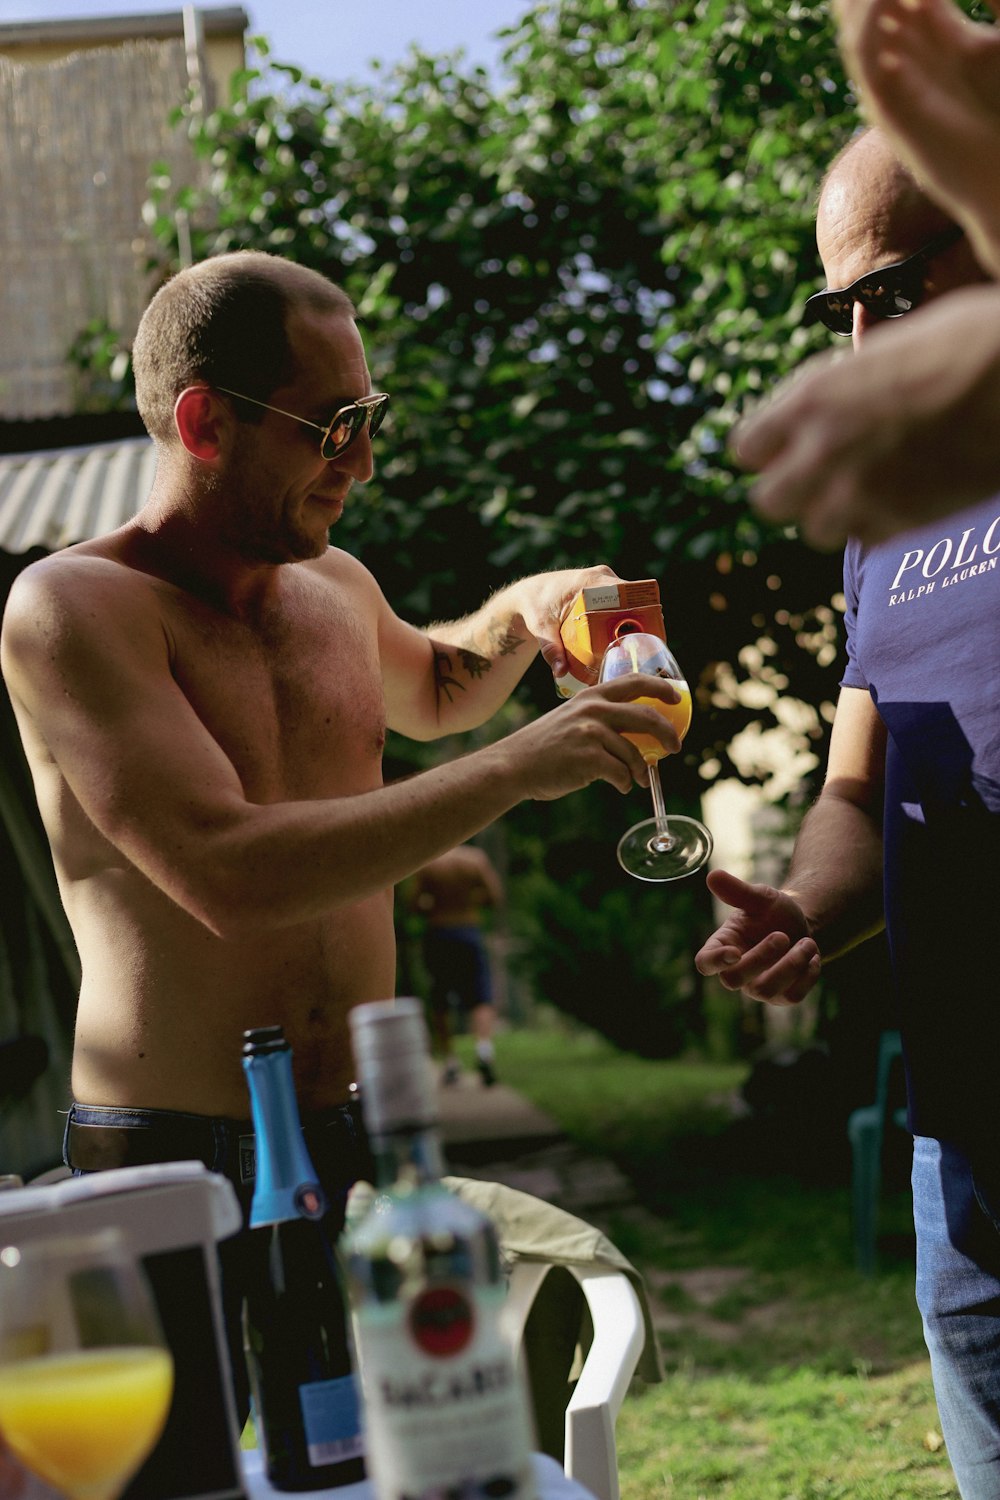 a shirtless man holding a glass of wine